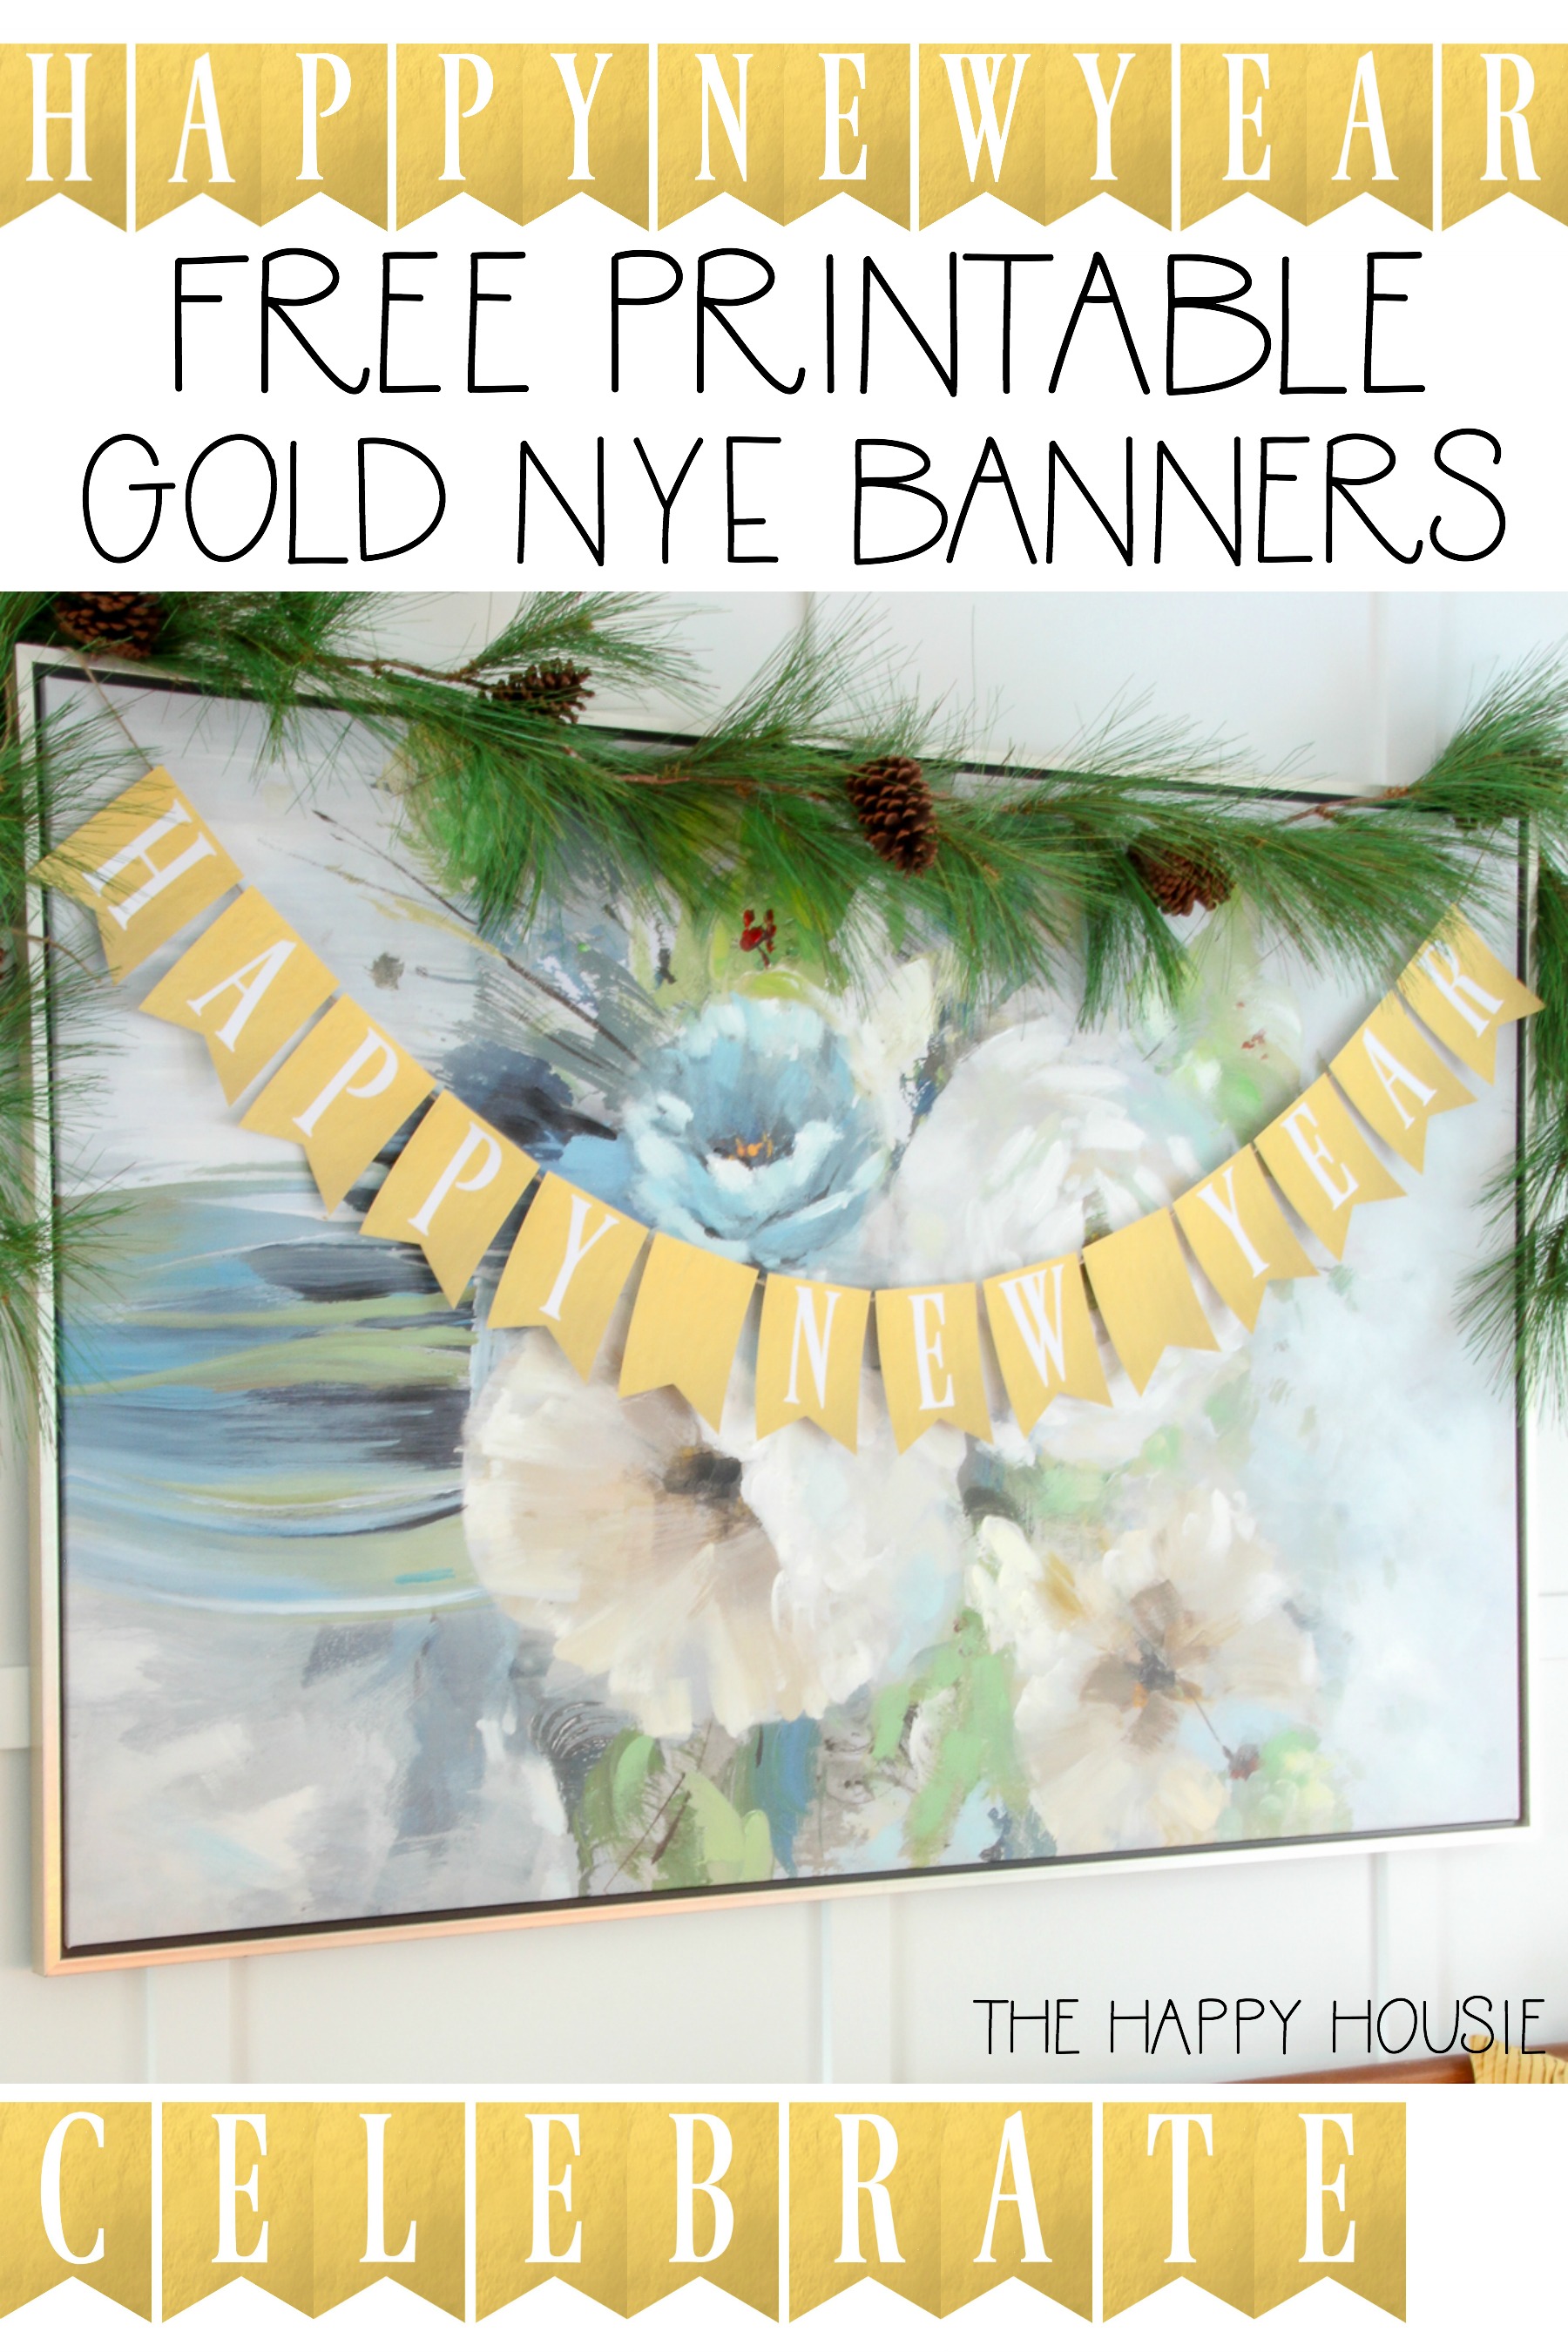 Happy New Year Free Printable Gold NYE Banner graphic.